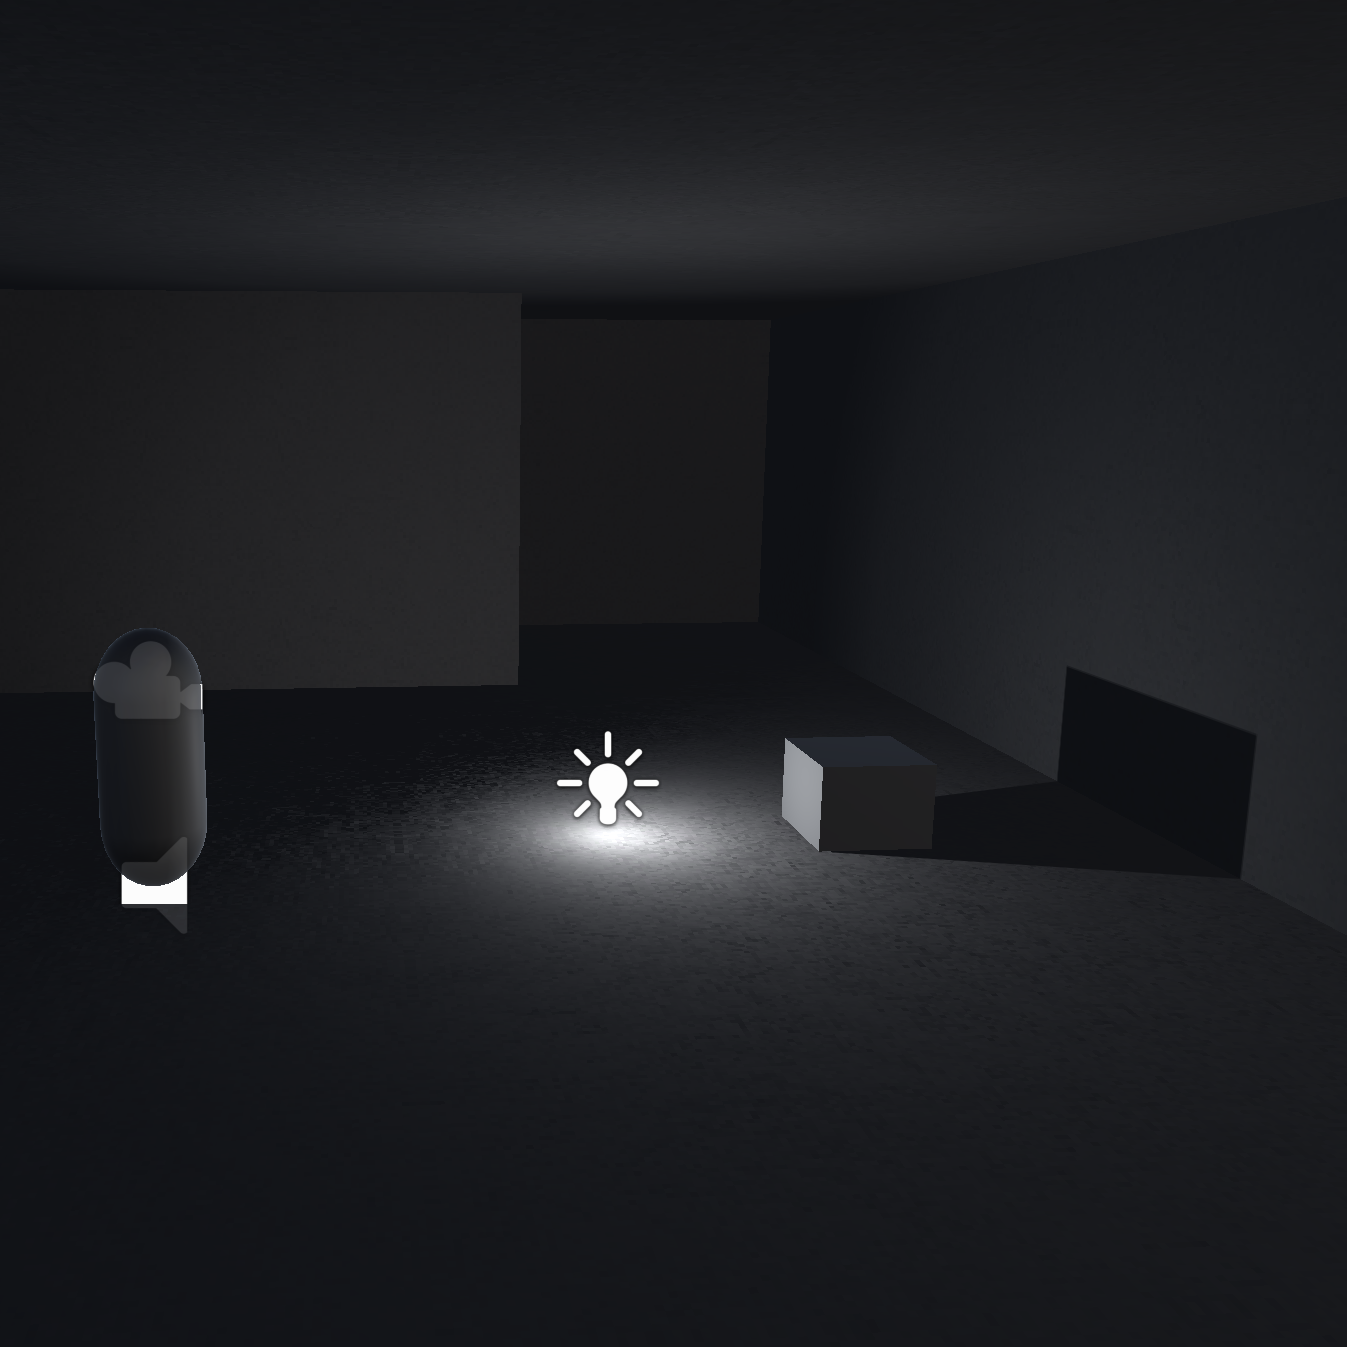 Image of the player capsule, a point light, and a cube in a dark room